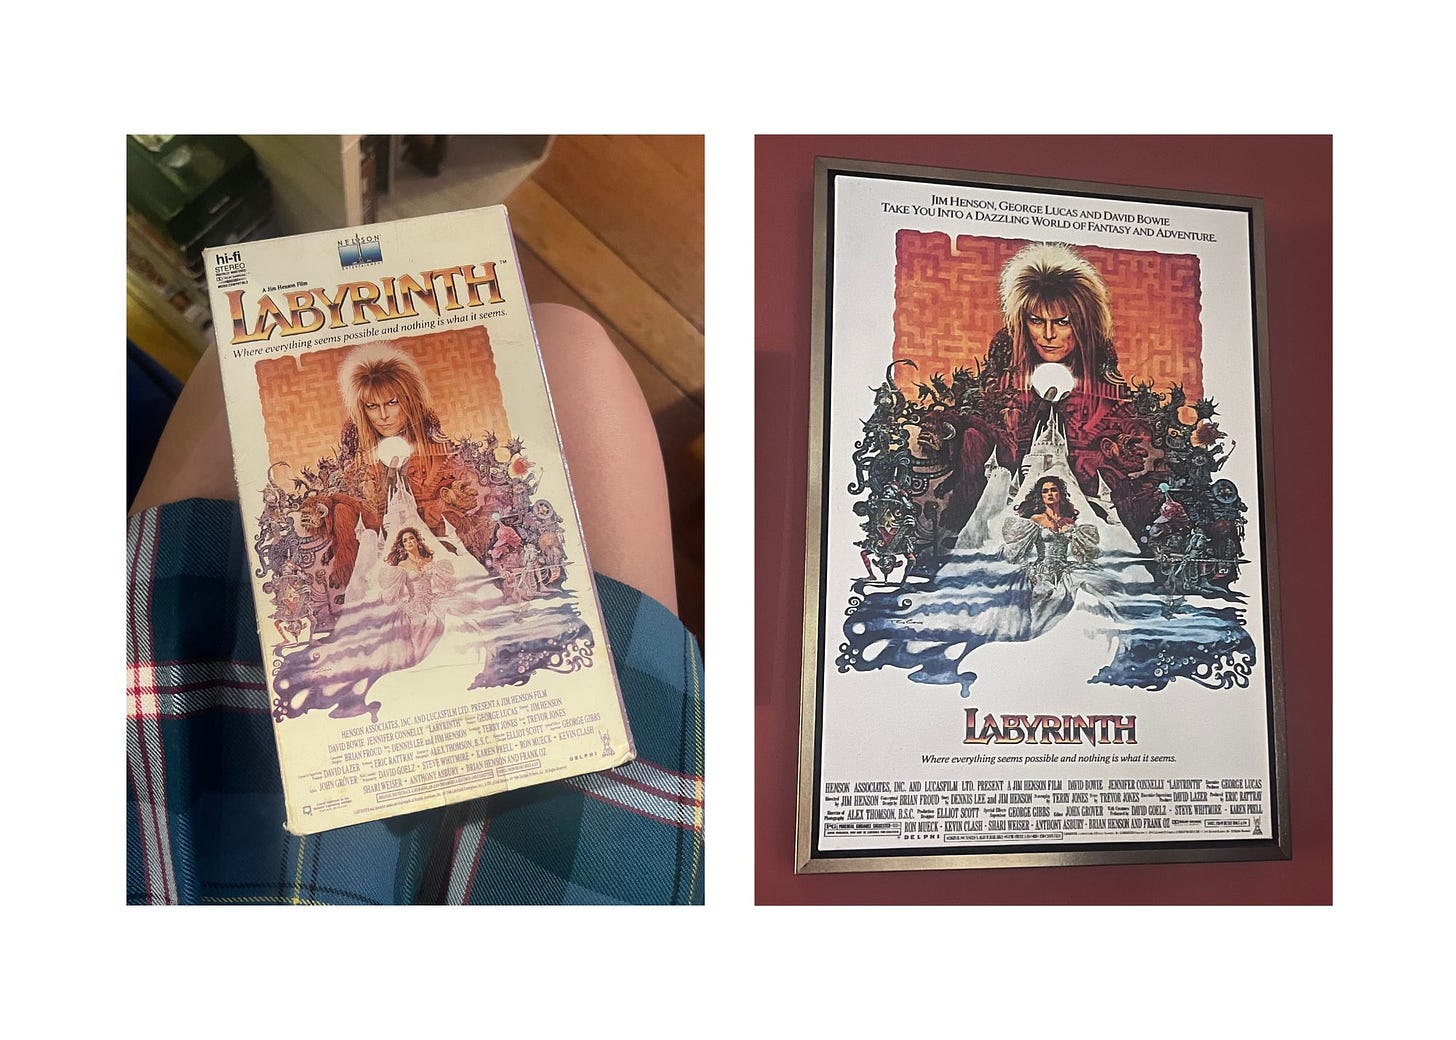 Side by side photos of a Labyrinth VHS tape and movie poster.